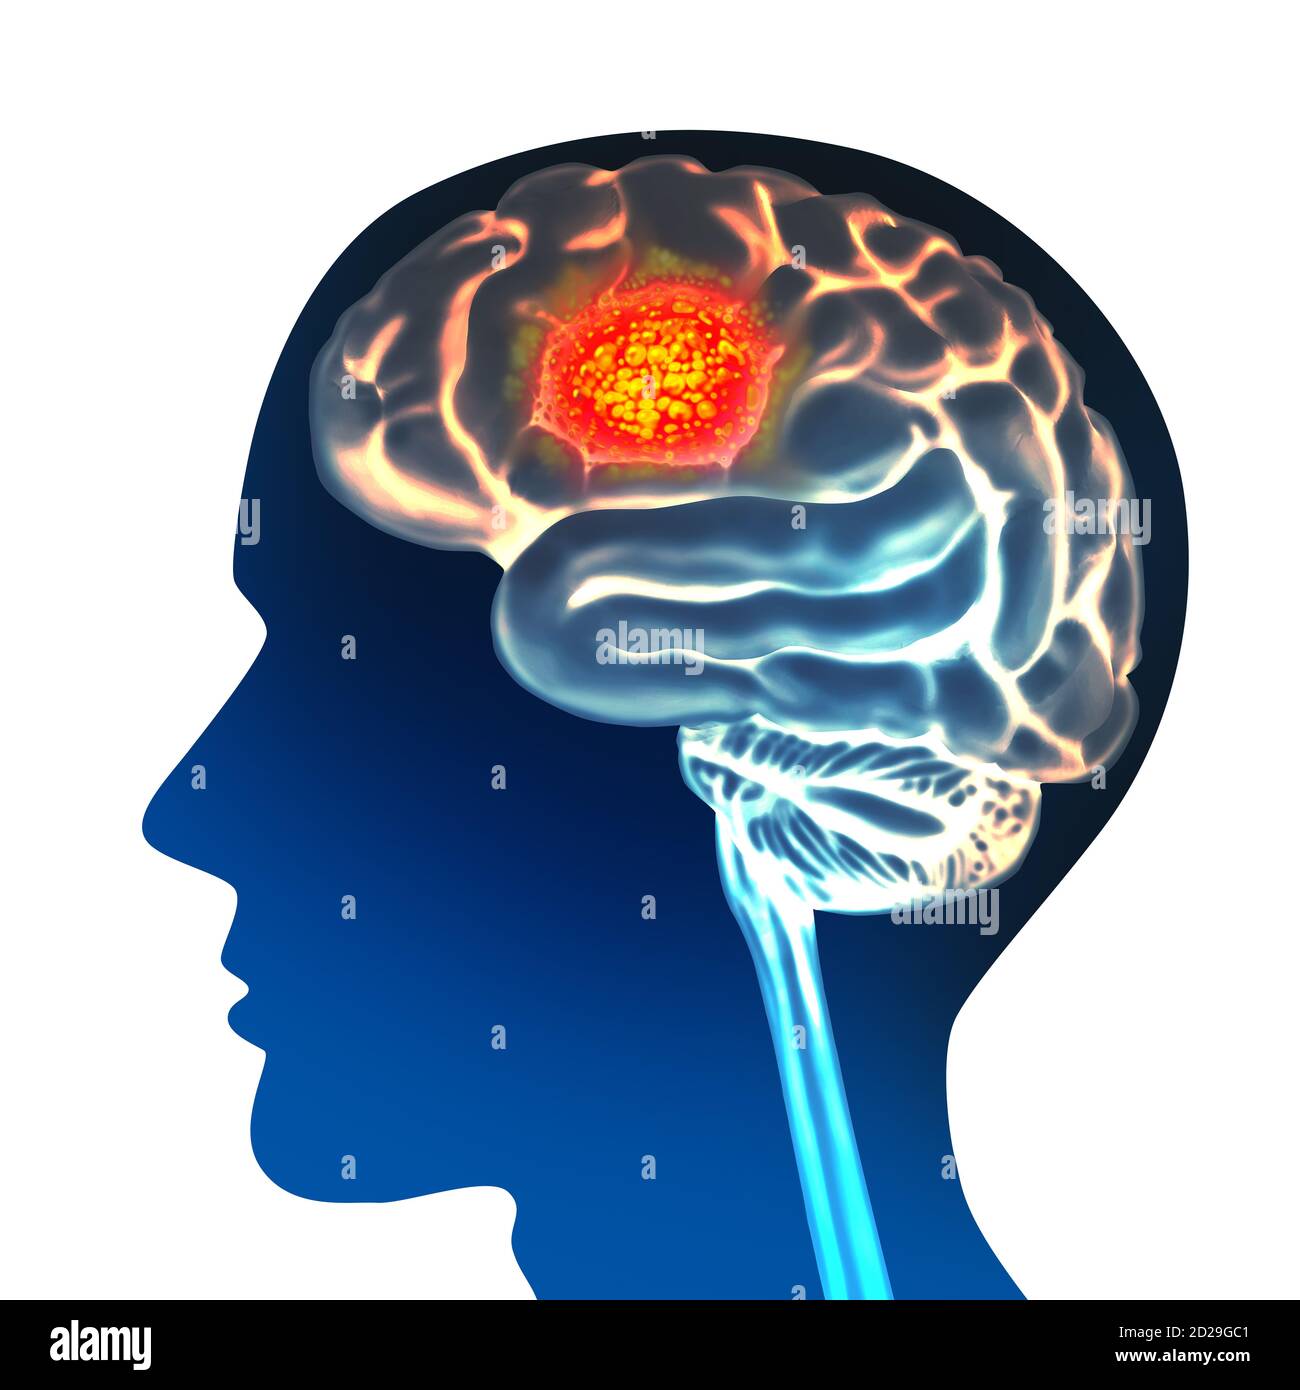 Brain cancer anatomy concept and malignant tumor symbol as a neurology body part with a microscopic magnification of malignant cells dividing. Stock Photo